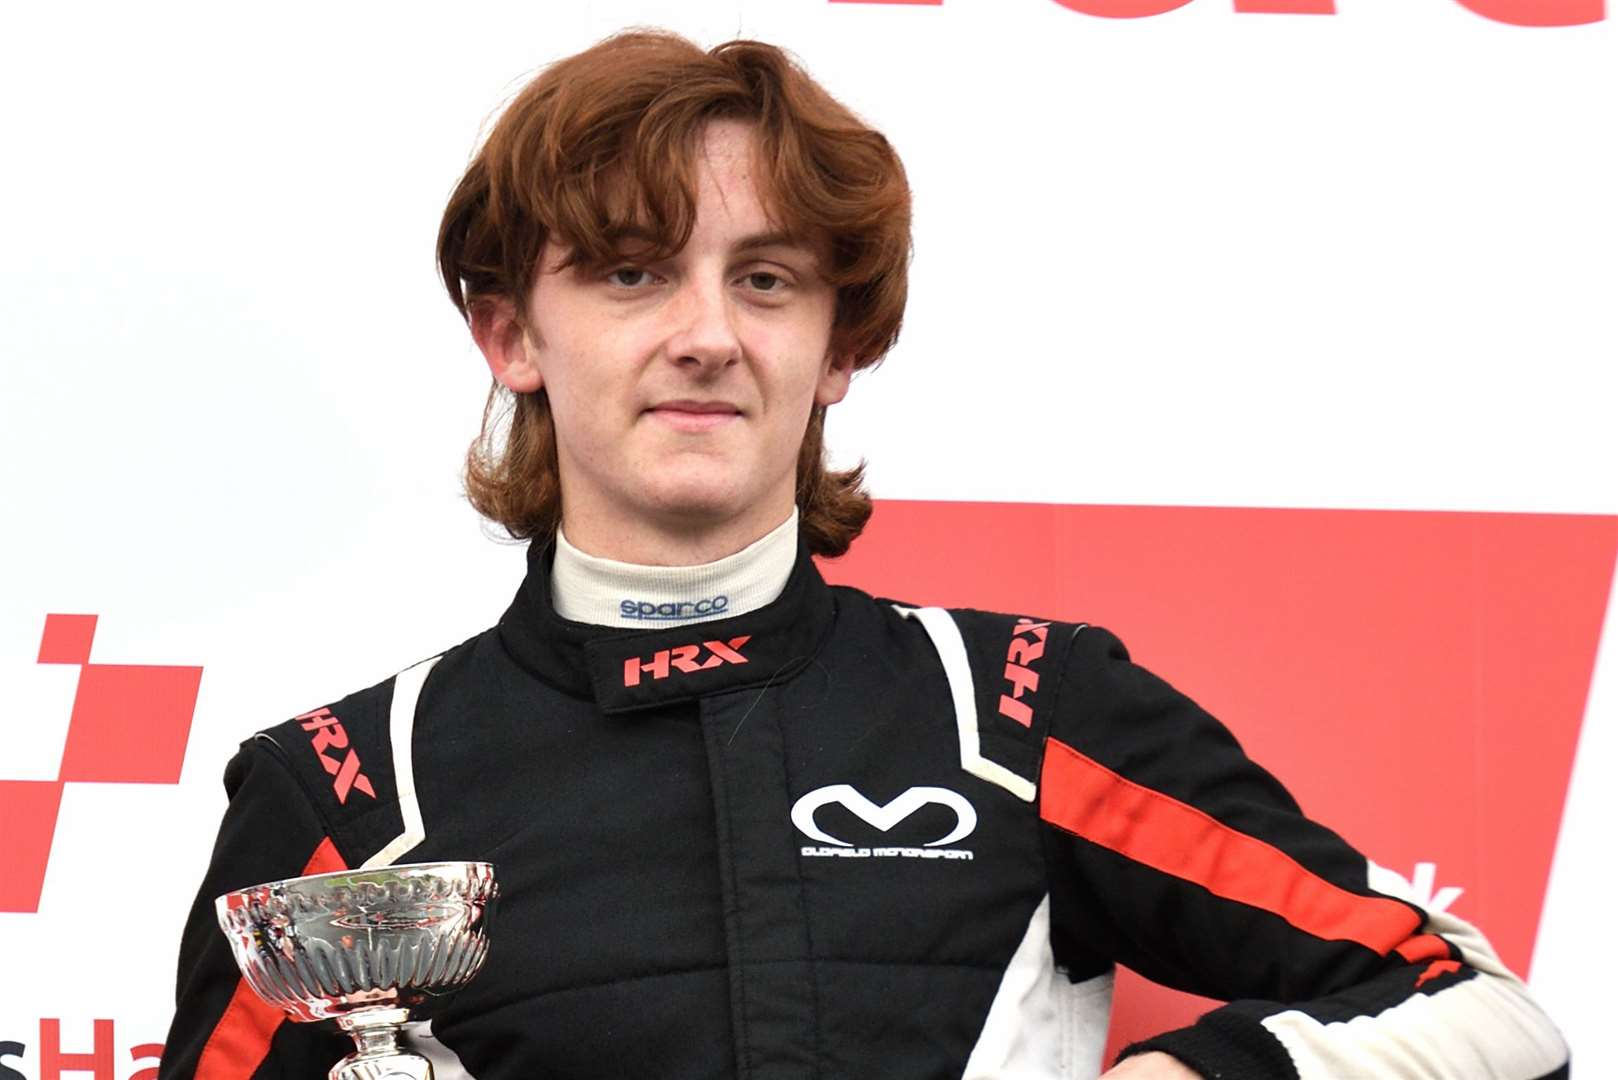 Lucas Romanek won both United Formula Ford featuring Champion of Brands races, claiming the Martin Down Trophy in the second event. Picture: Simon Hildrew